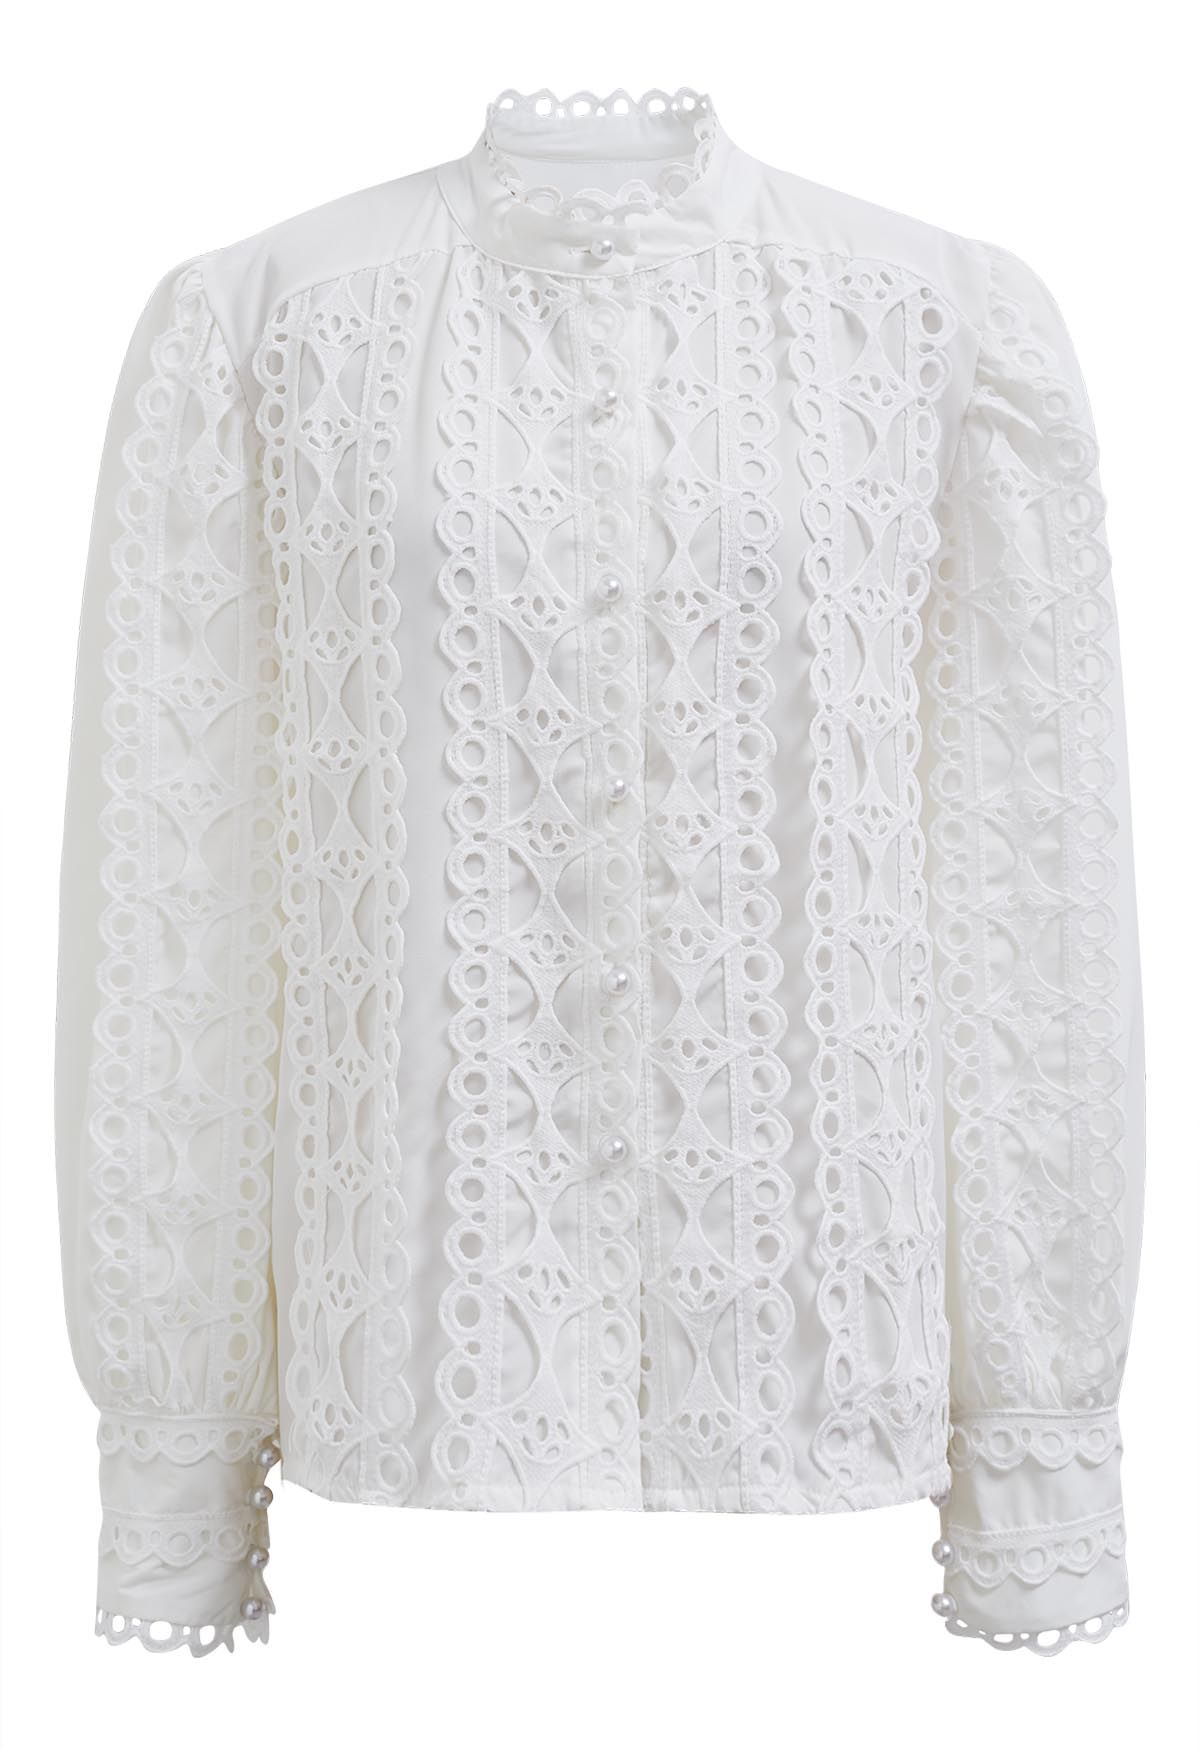 Exquisite Cutwork Bubble Sleeves Button-Up Shirt in White - Retro ...